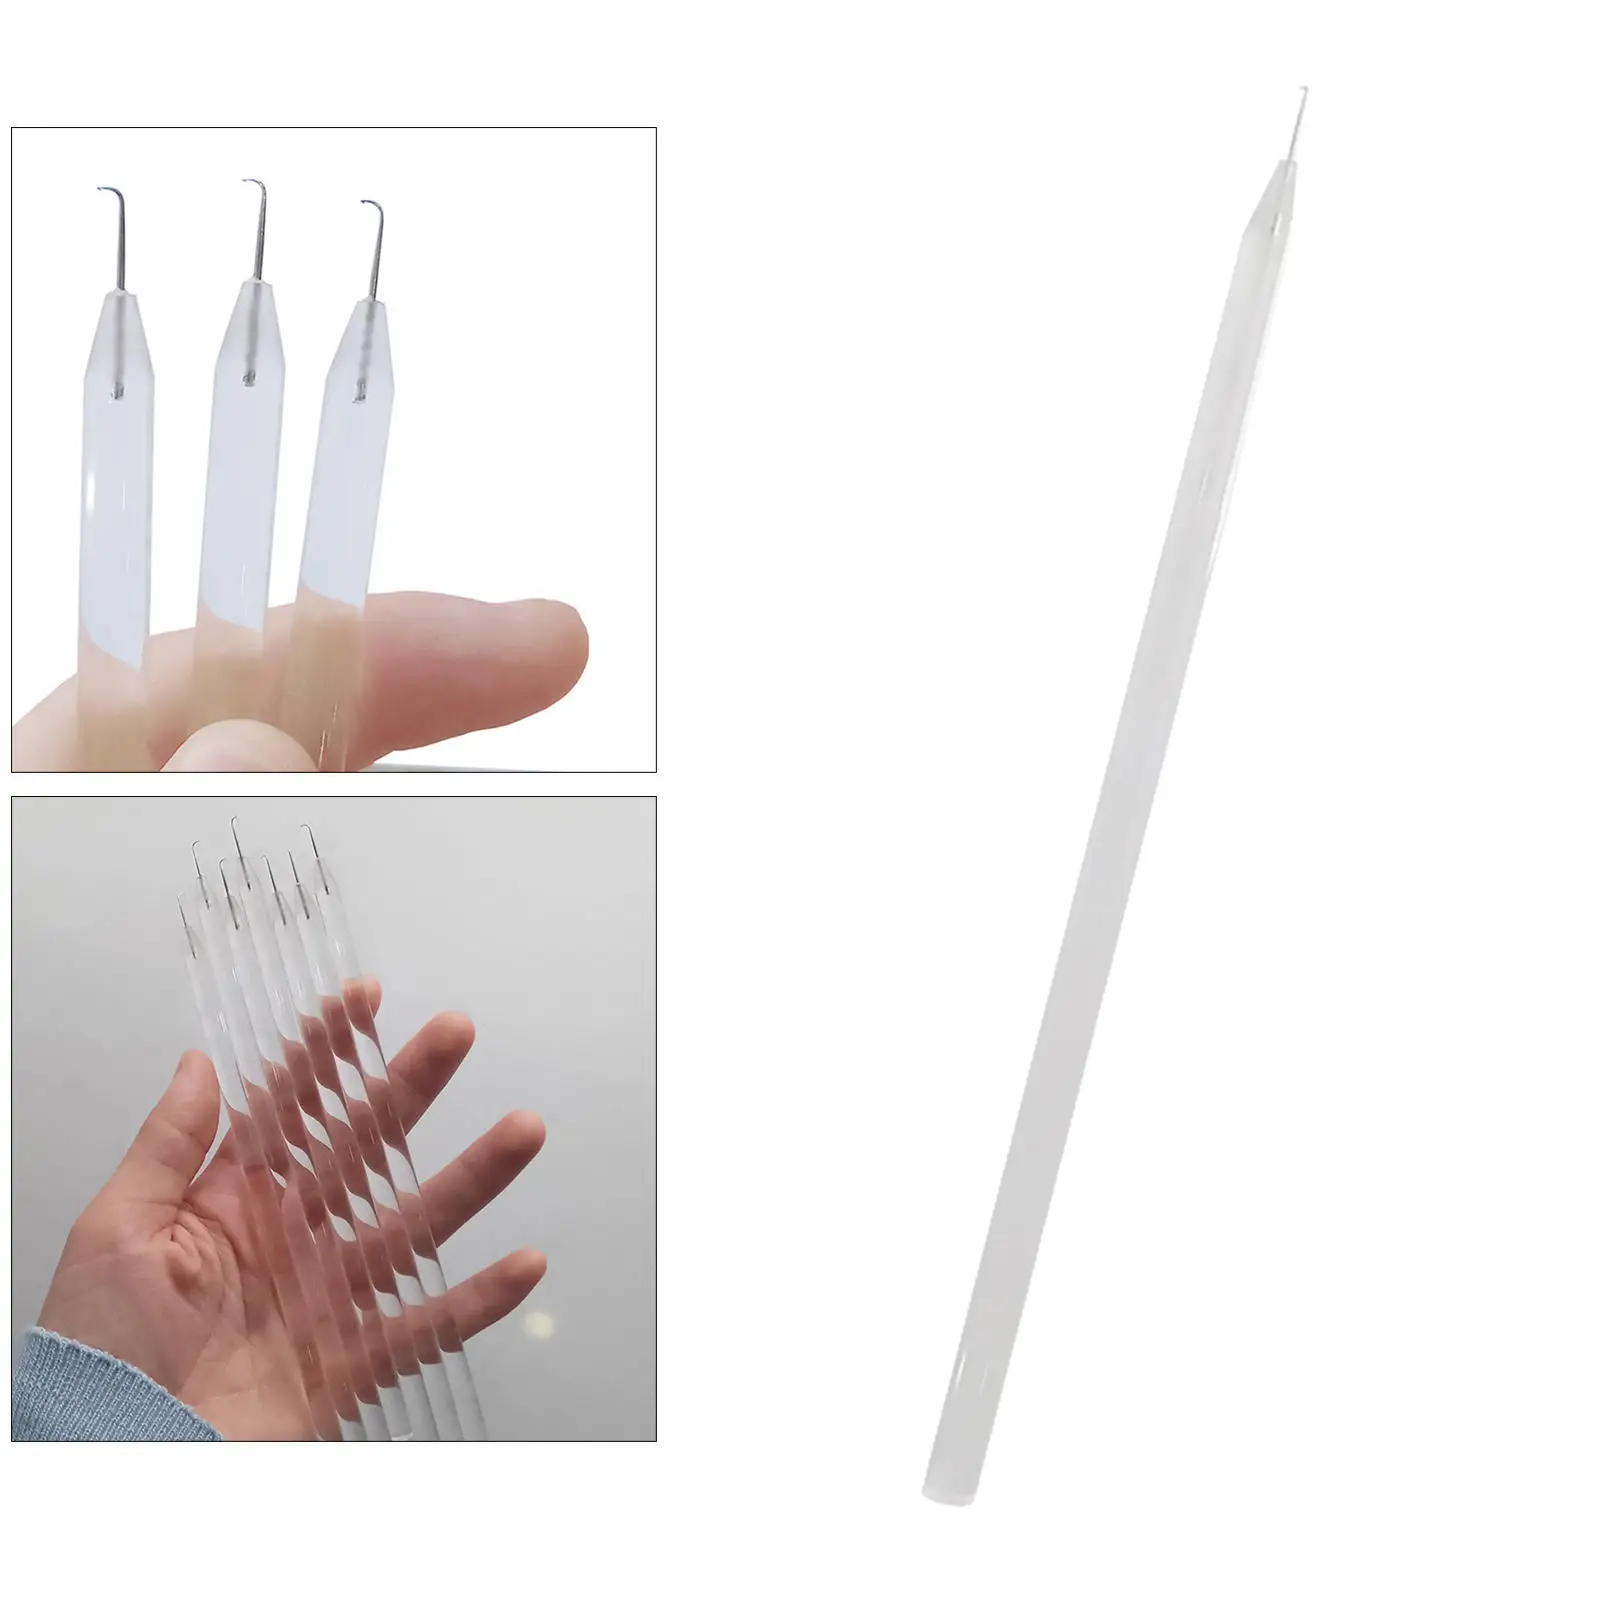 1x Crochet Ventilating Needles Crafts Hair Extension Supplies 15cm Hook Needle for Toupee Hairpiece Wigs Lace Wig 1-2/2-3/3-4